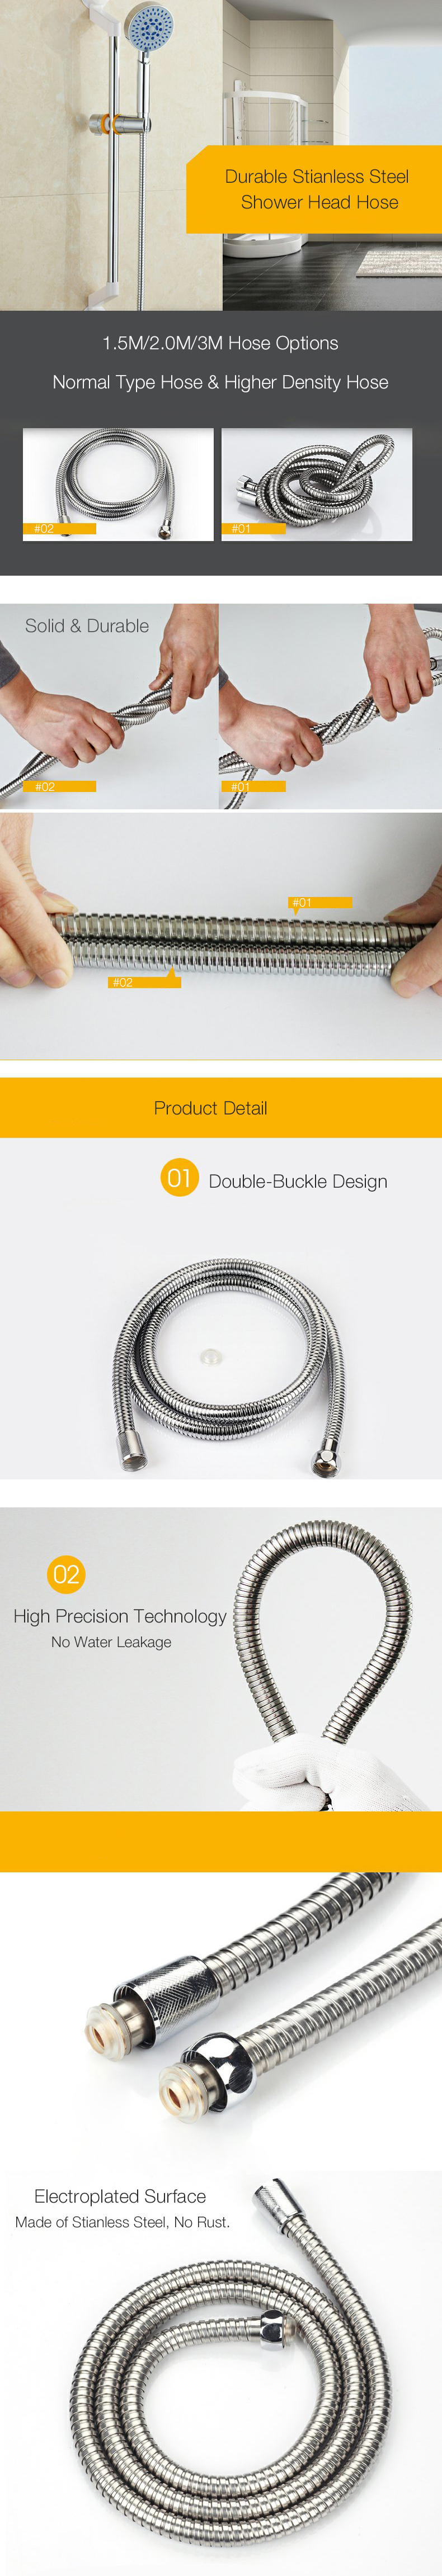 Bathroom-15M-2M-3M-Flexible-Stainless-Steel-Shower-Head-Accessory-Thickened-Spring-Shower-Head-Hose-1287533